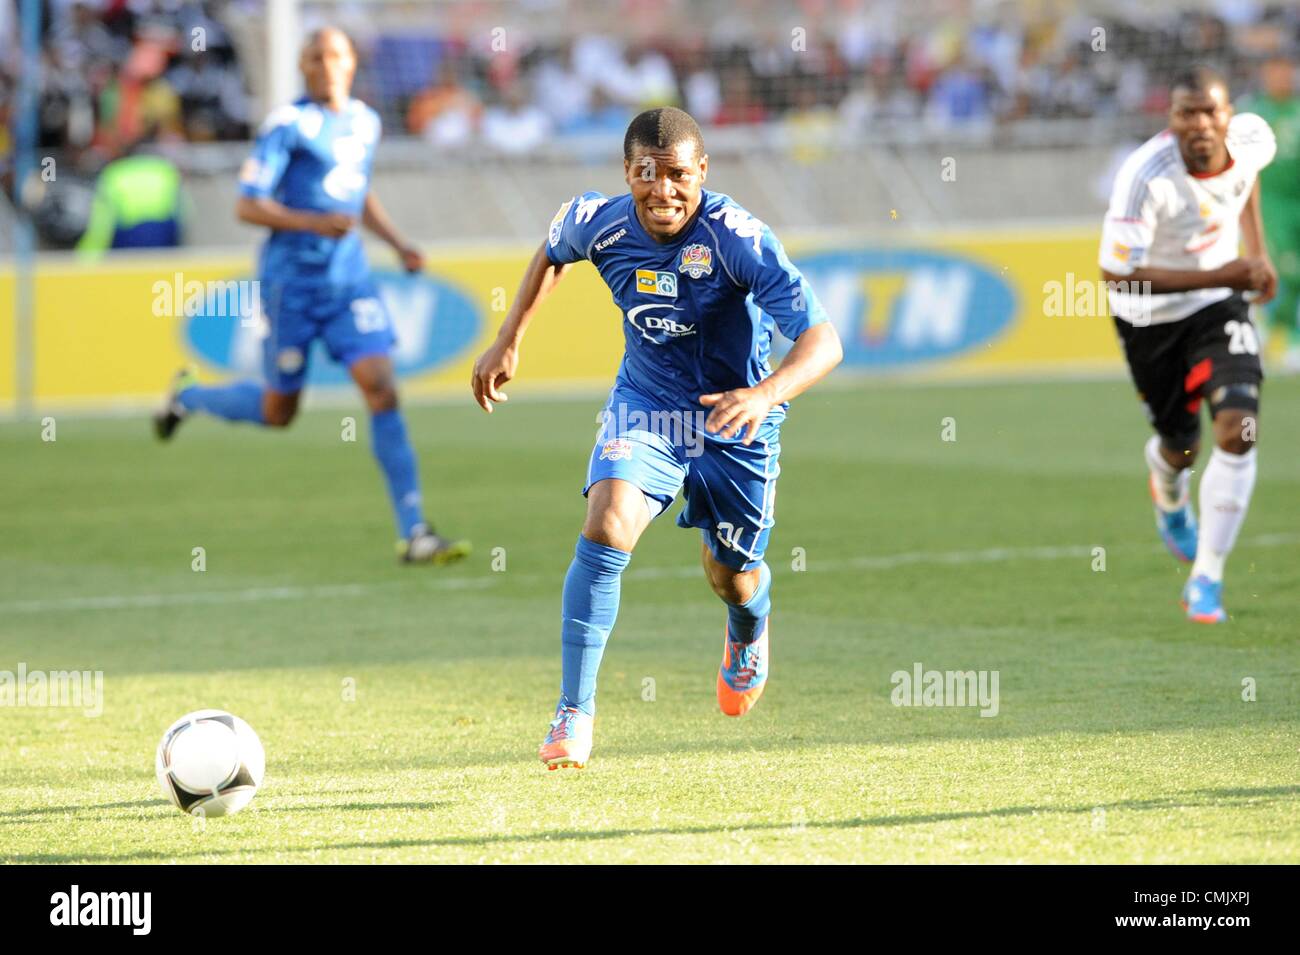 POLOKWANE, SOUTH AFRICA - AUGUST 19, Mabhudi Khenyeza during the MTN 8 1st leg semi final match between SuperSport United and Orlando Pirates at Peter Mokaba Stadium on August 19, 2012 in Polokwane, South Africa Photo by Lee Warren / Gallo Images Stock Photo